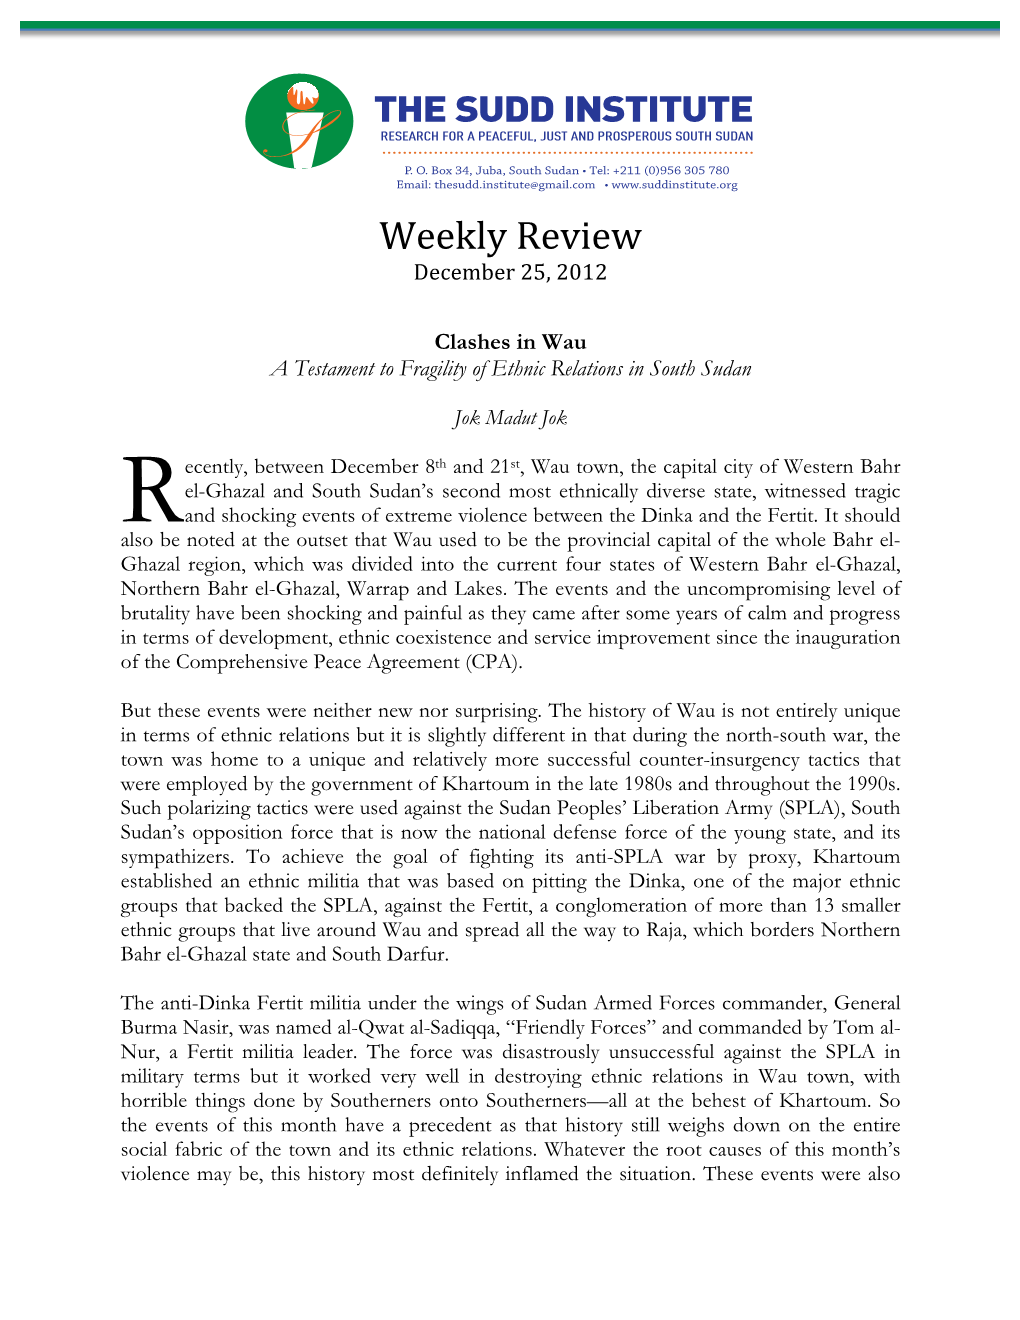 Weekly Review December 25, 2012